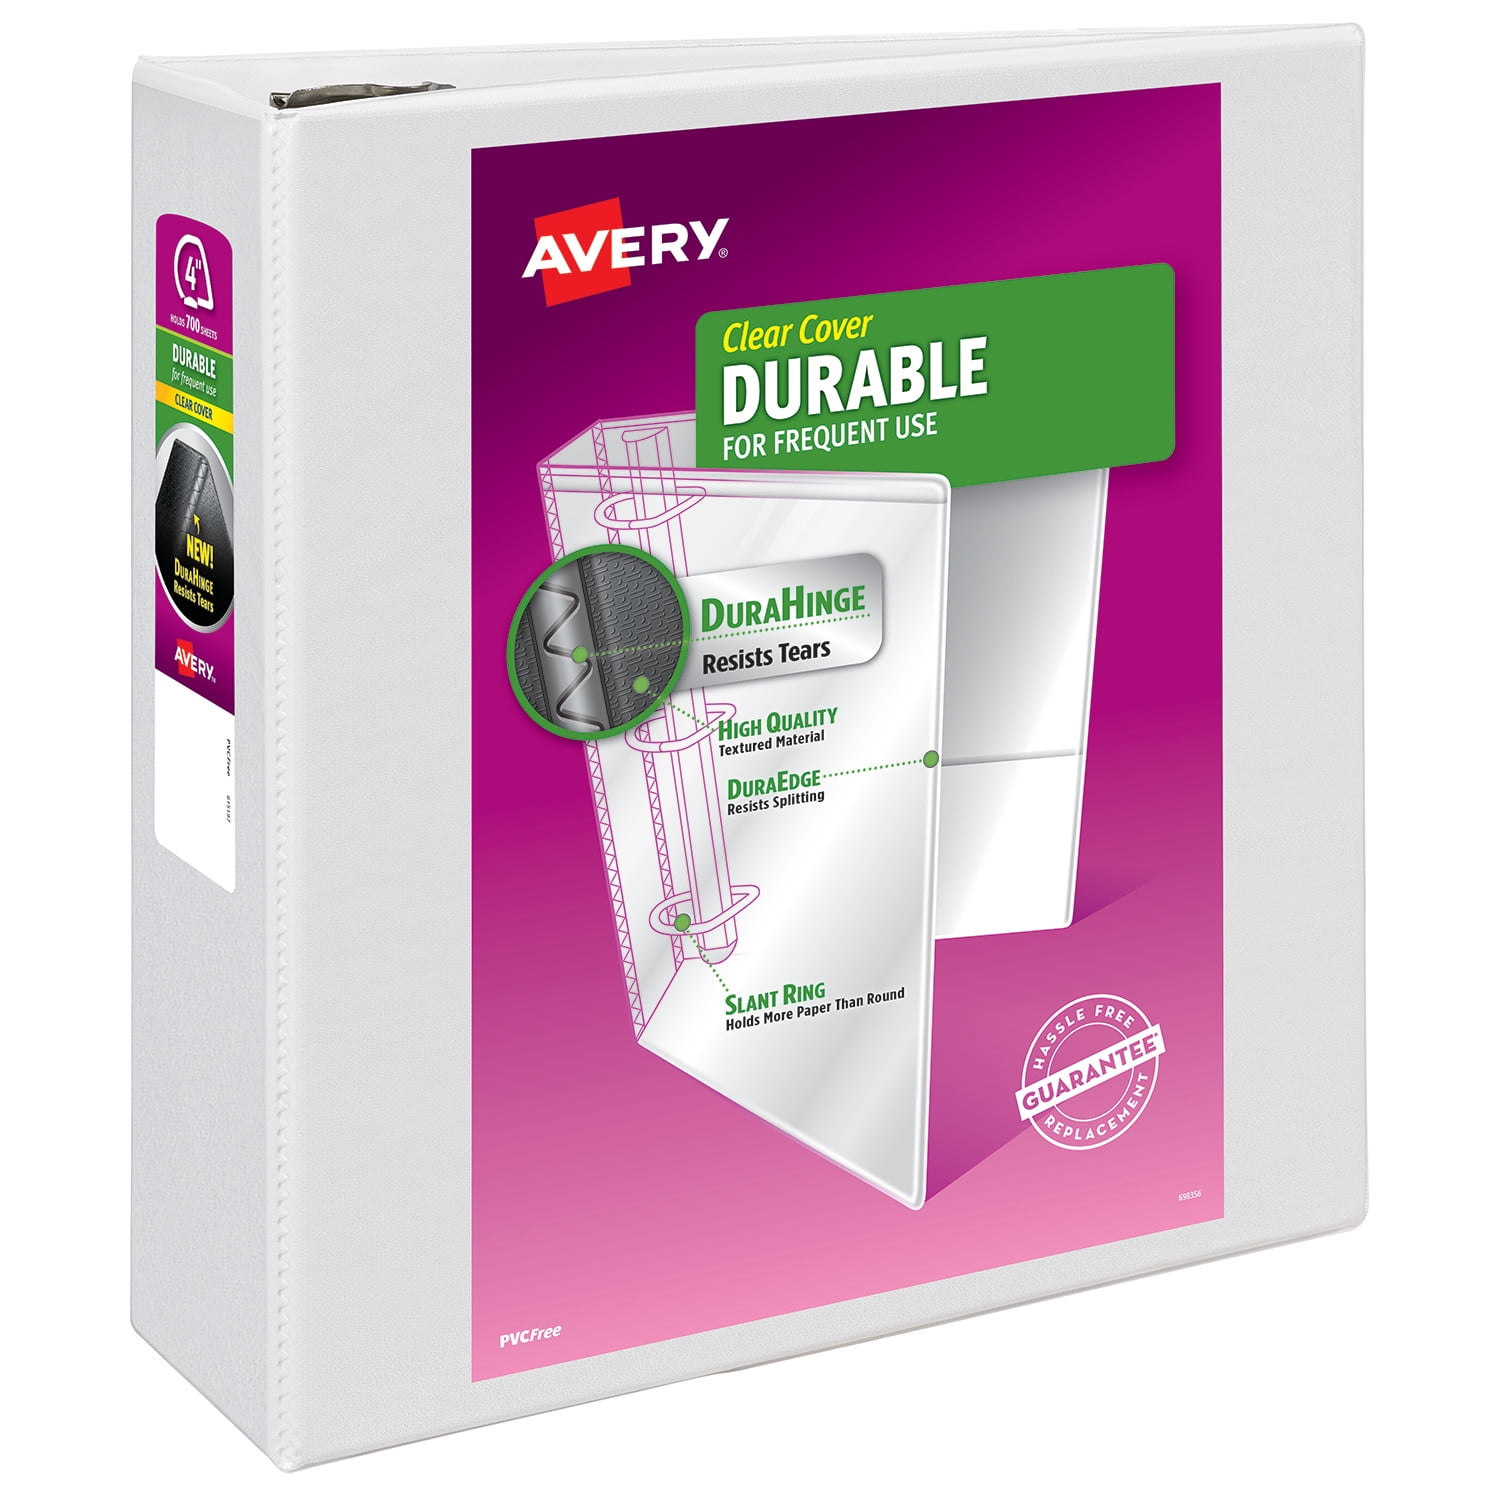 Avery Durable View 3 Ring Binder 4 EZD Rings 1 White Binder 09801 f11ecddf 0195 4c36 b519 668d7f90cc1f 1.459bfdb686caec2f71680a820b4c5bda